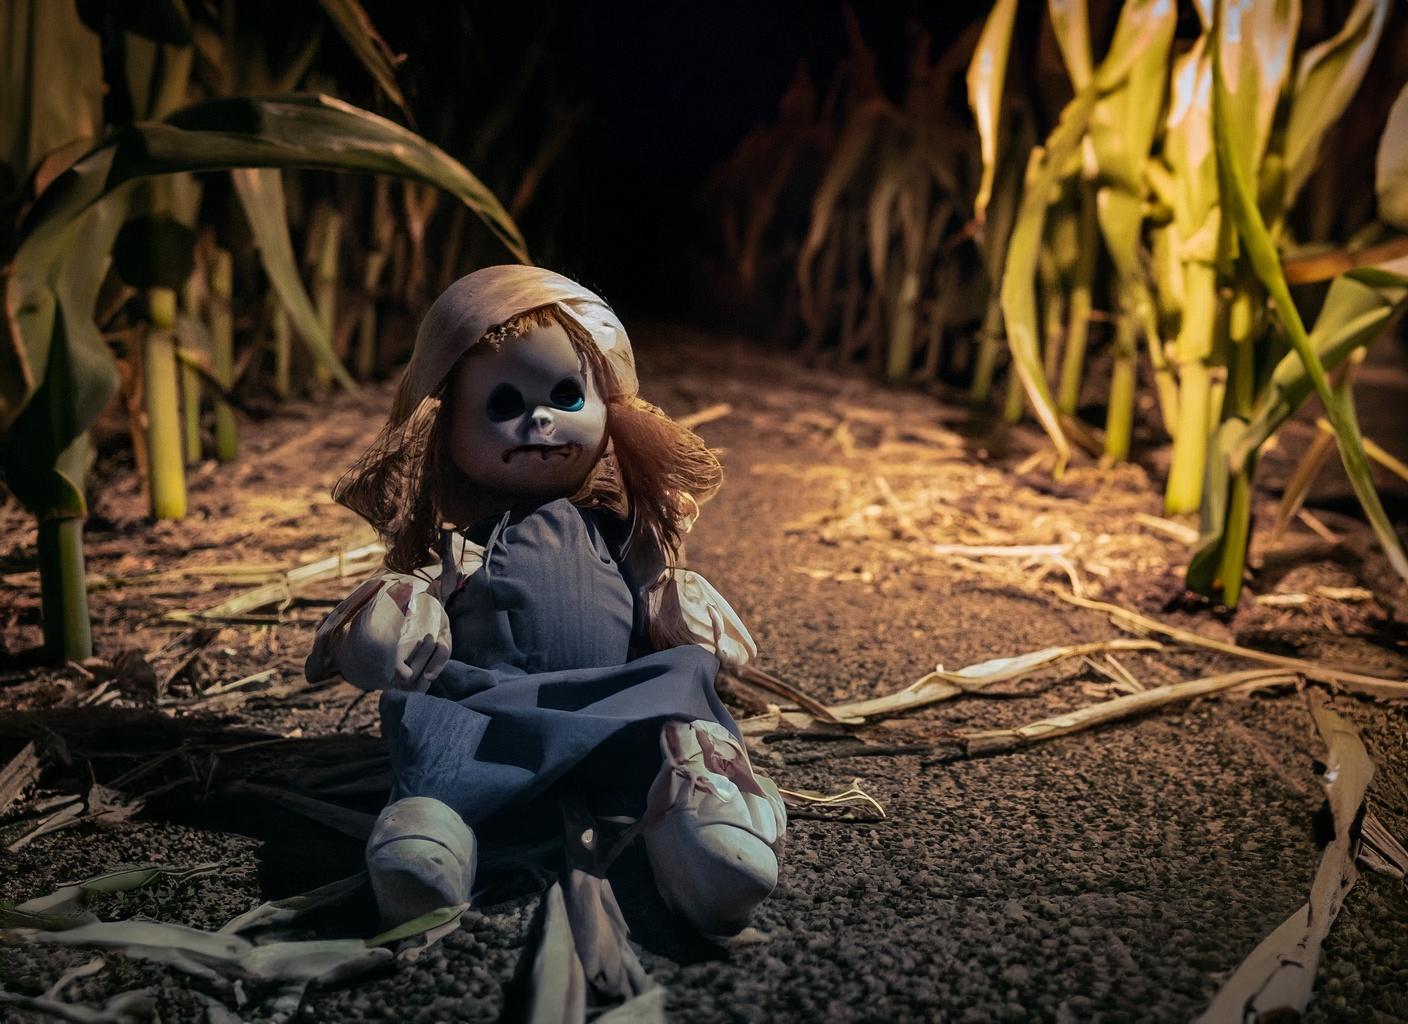 A scary doll in a corn maze at night.